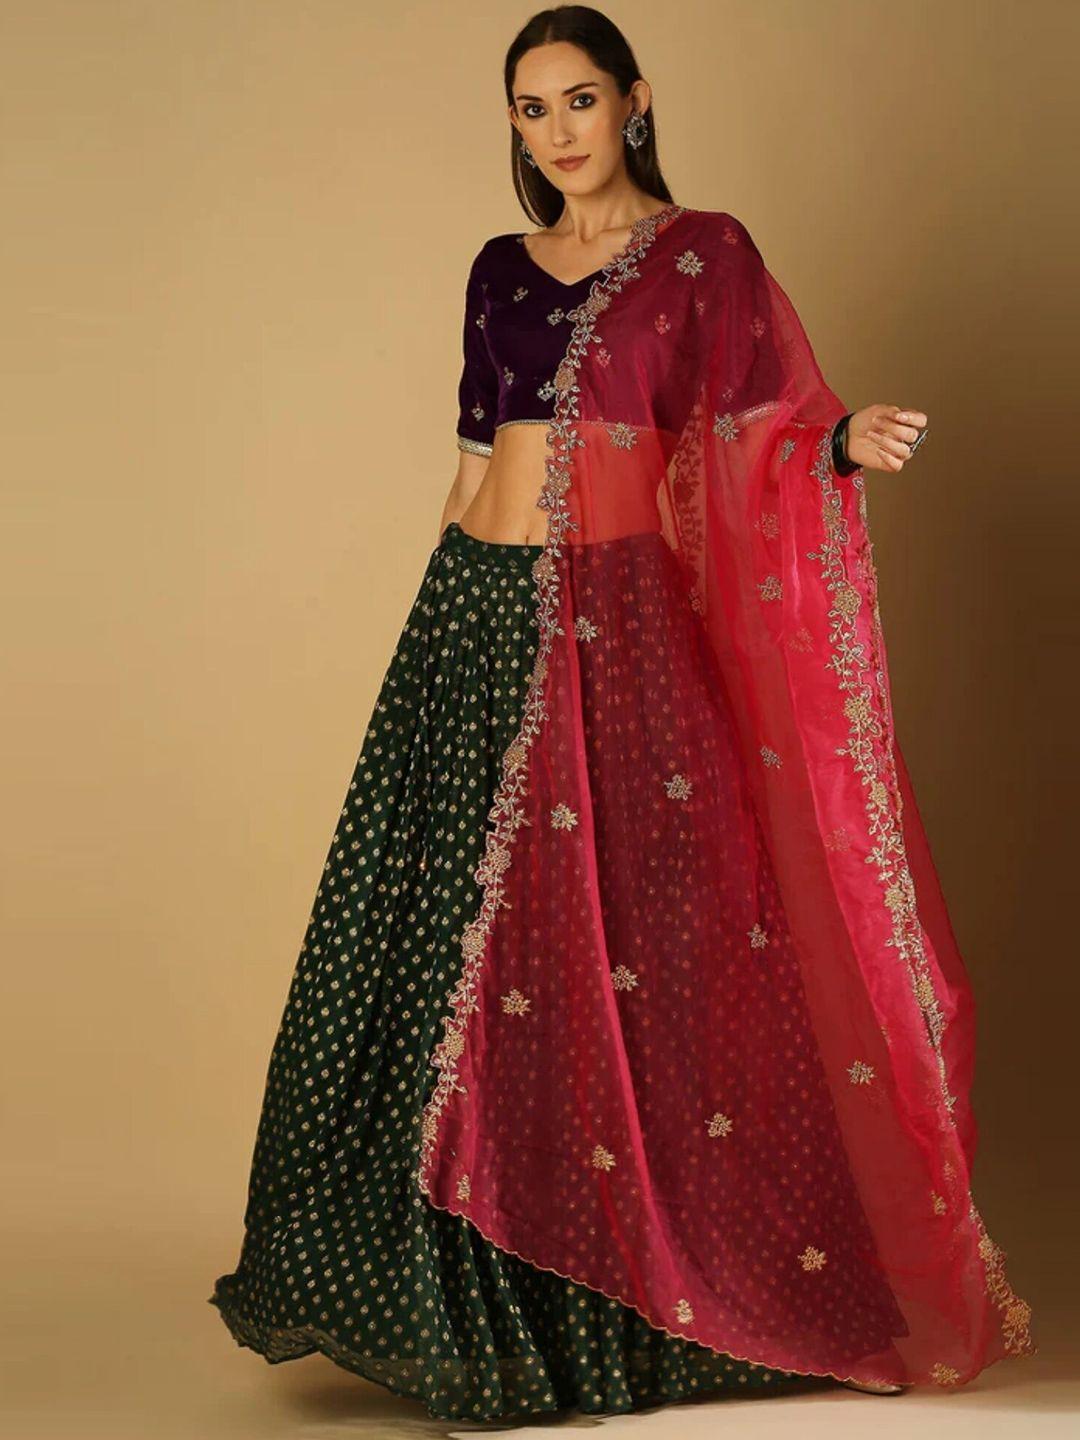 monk & mei embroidered ready to wear lehenga blouse with dupatta